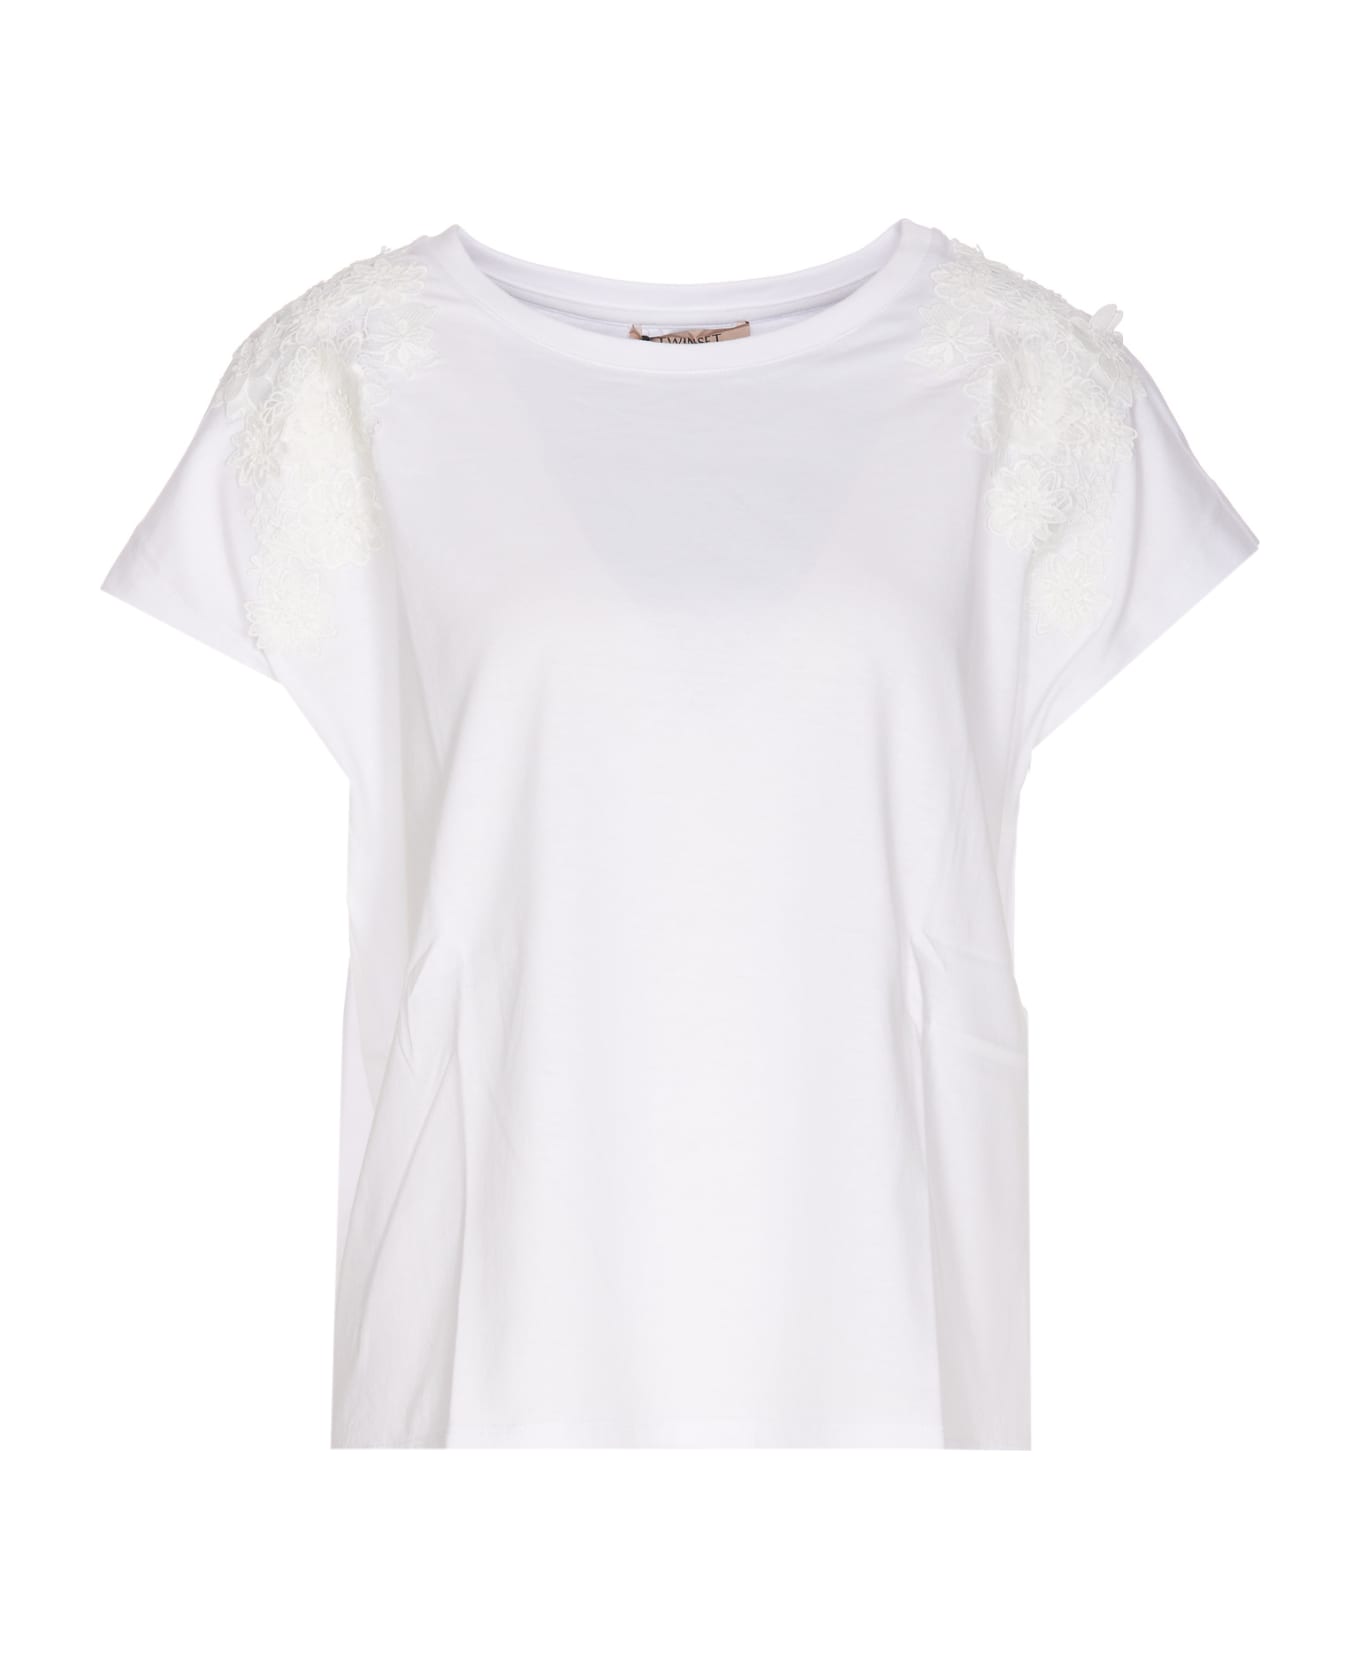 TwinSet T-shirt With Lace Details - White